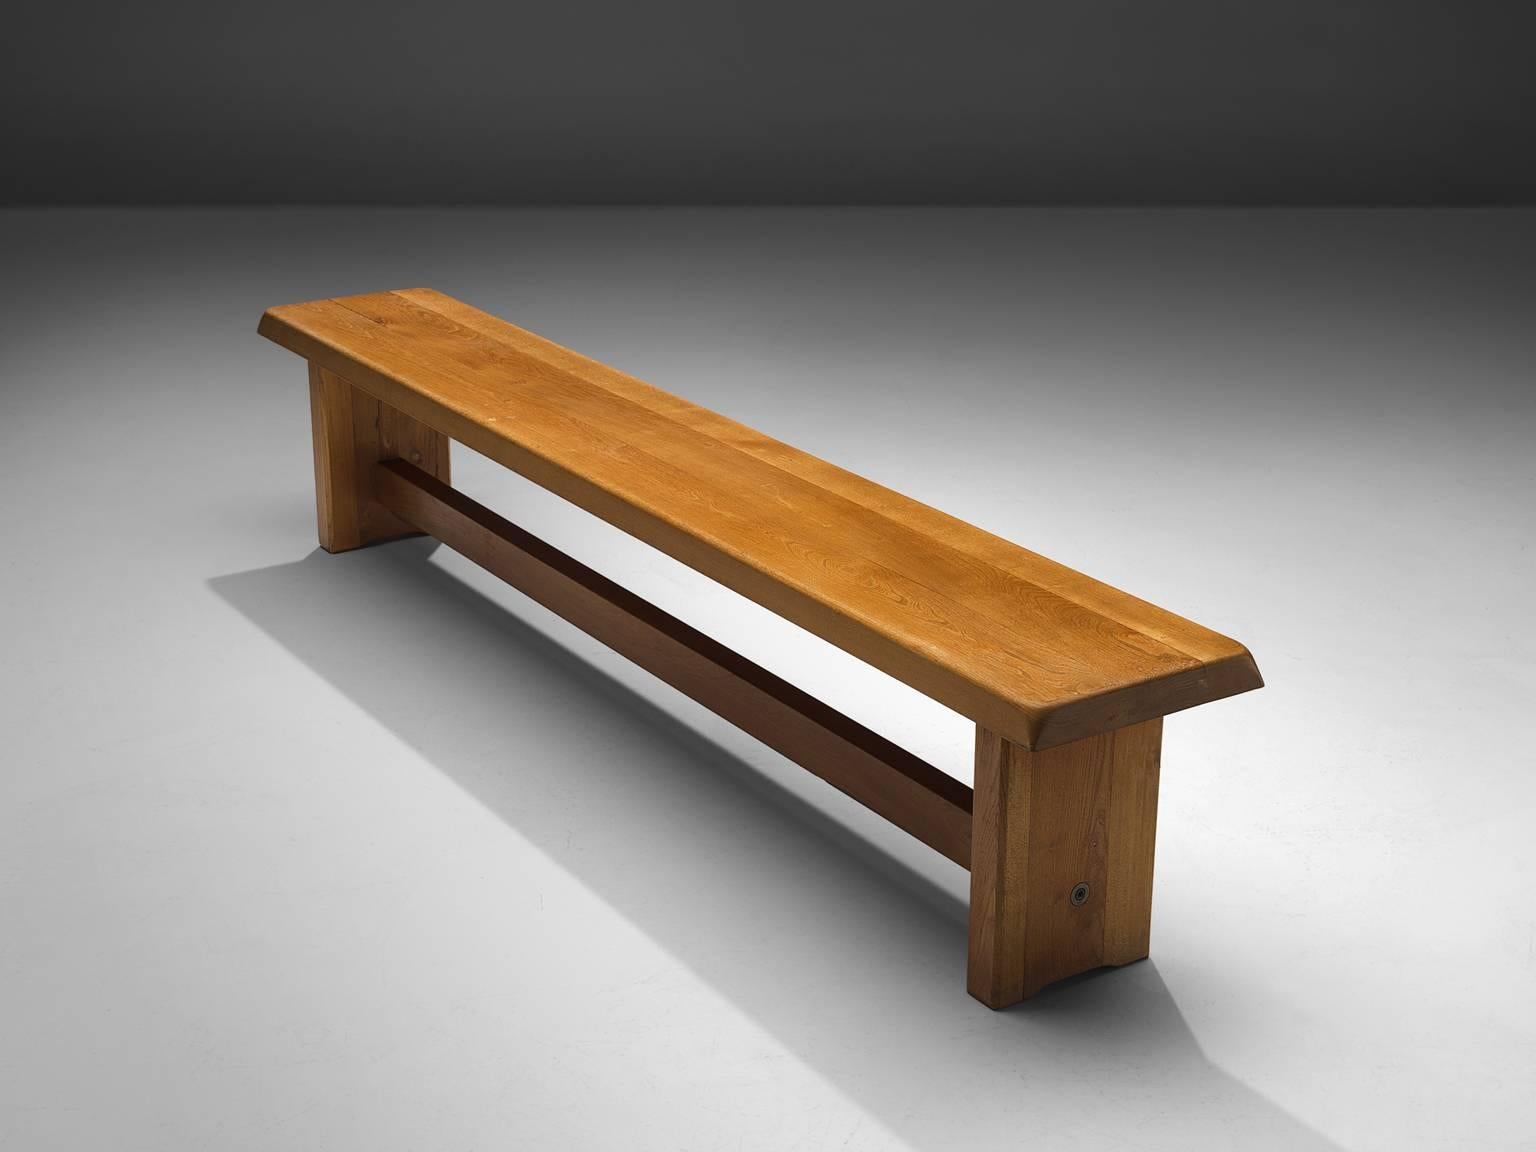 Pierre Chapo, bench S14D, elm, France, 1950s. 

This elm bench is designed by the French designer Pierre Chapo. The rectangular top features sloping edges, rests on a two-legged base with a connecting horizontal beam. The strong an simplified